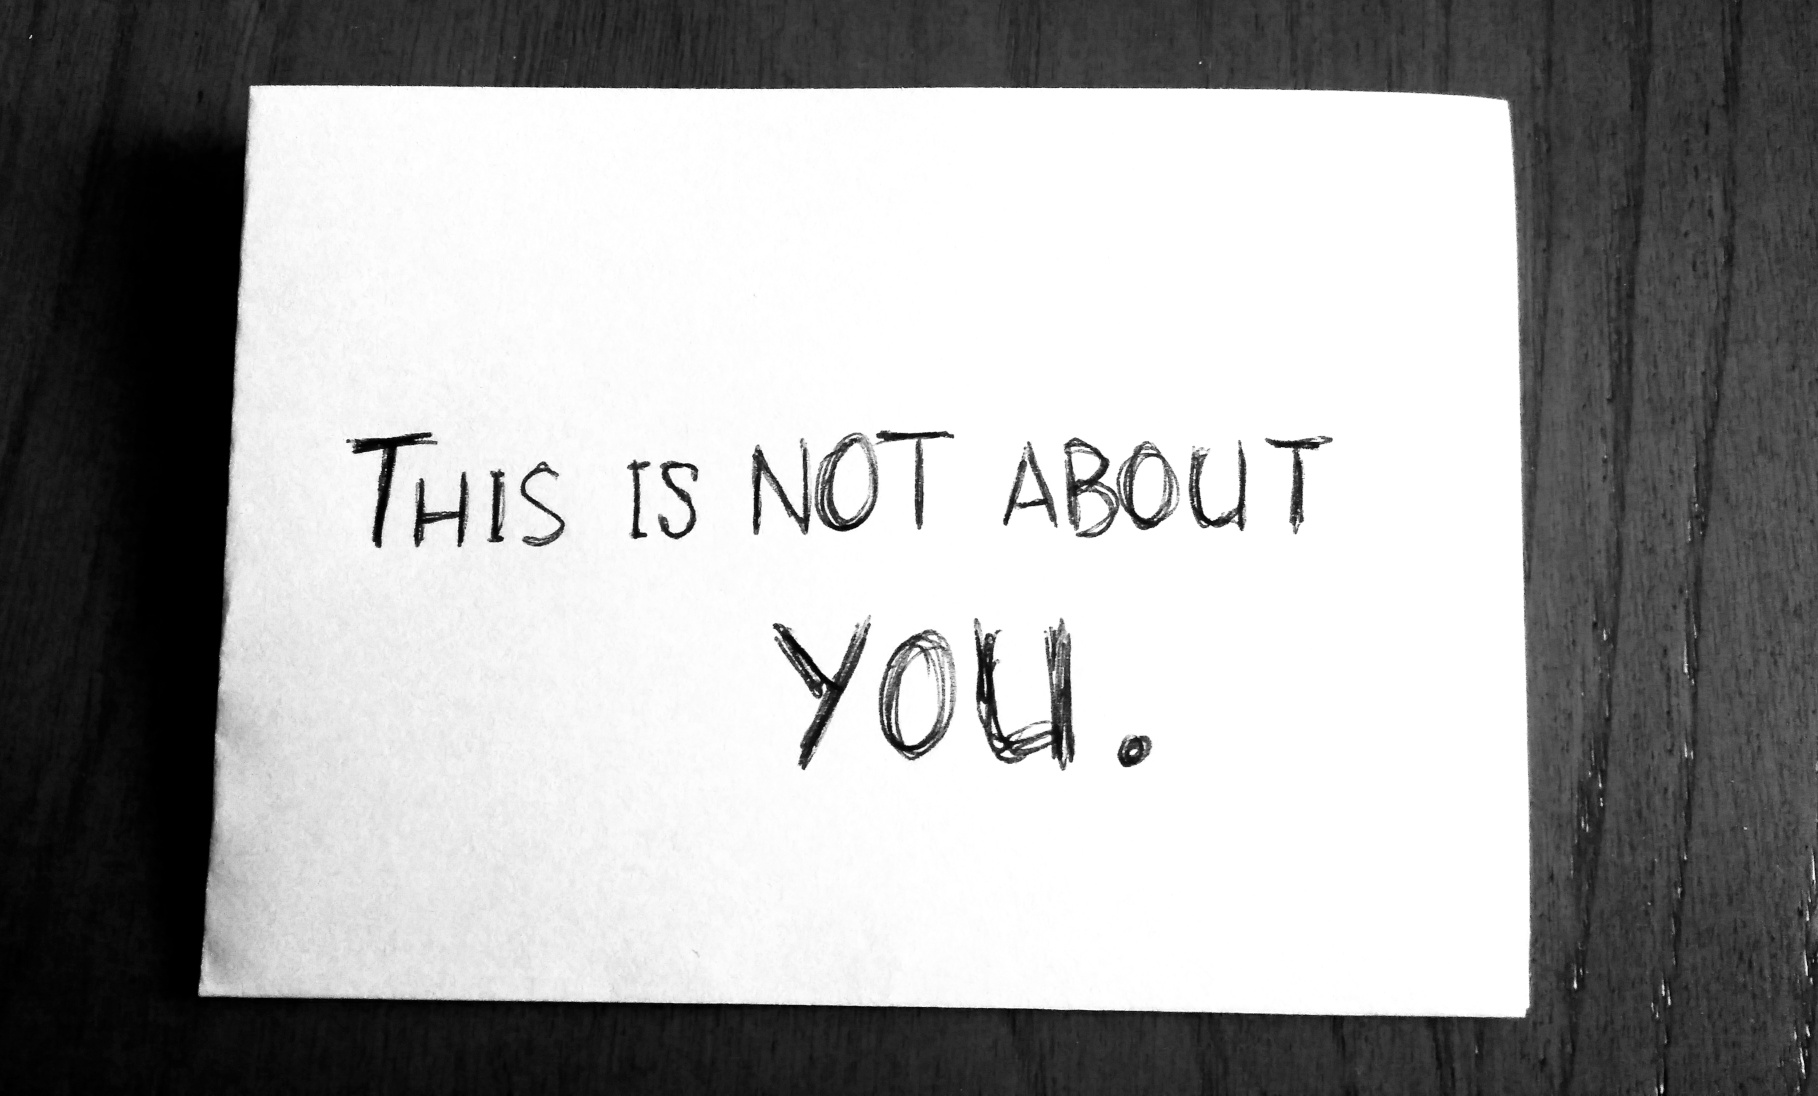 It's not about you.